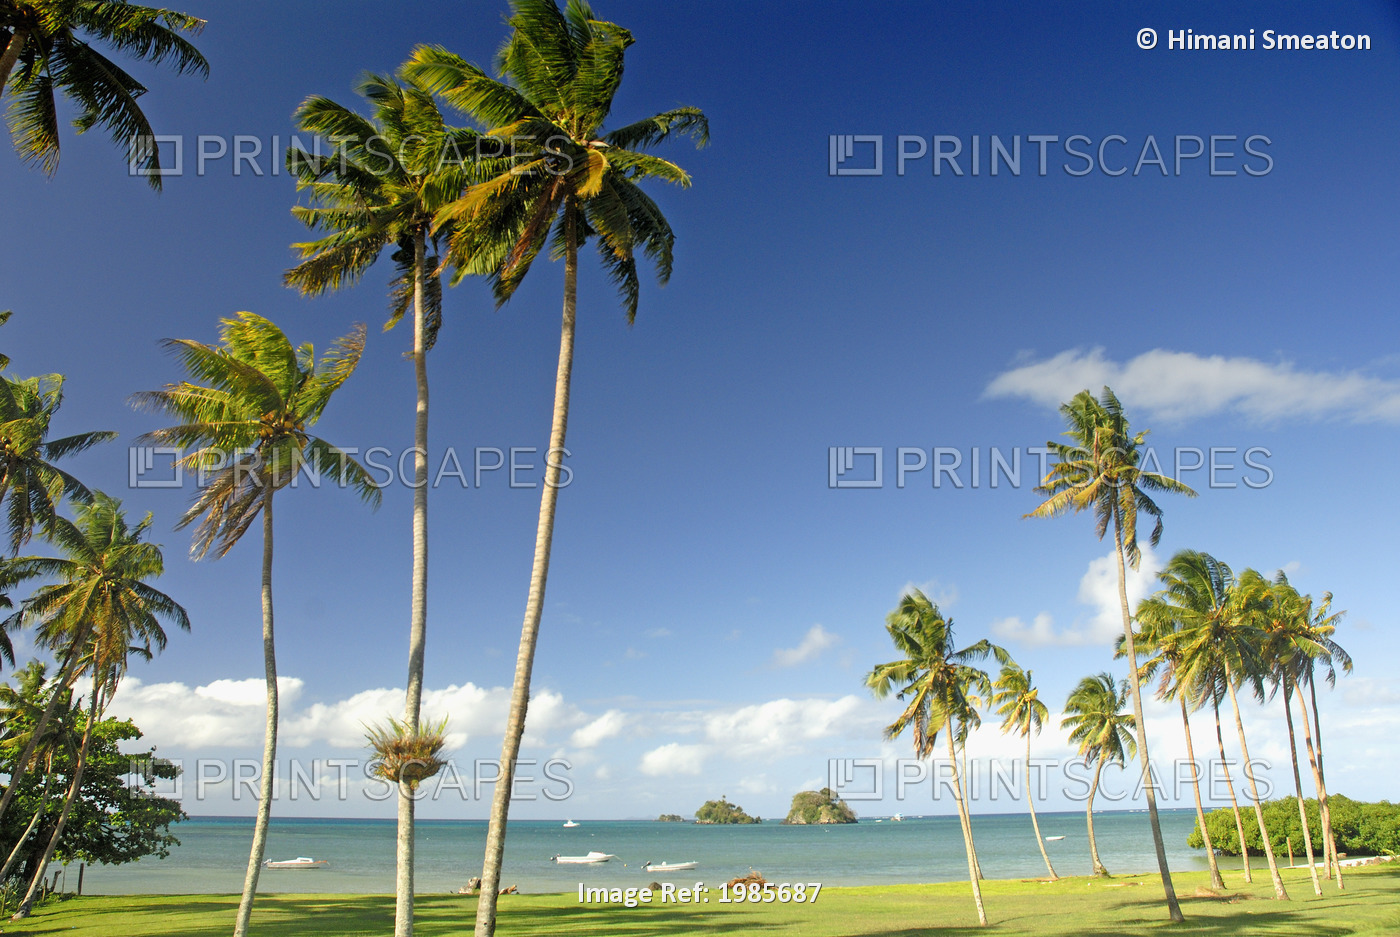 Fiji, Grassy shoreline with tall palm trees along ocean with boats and small ...